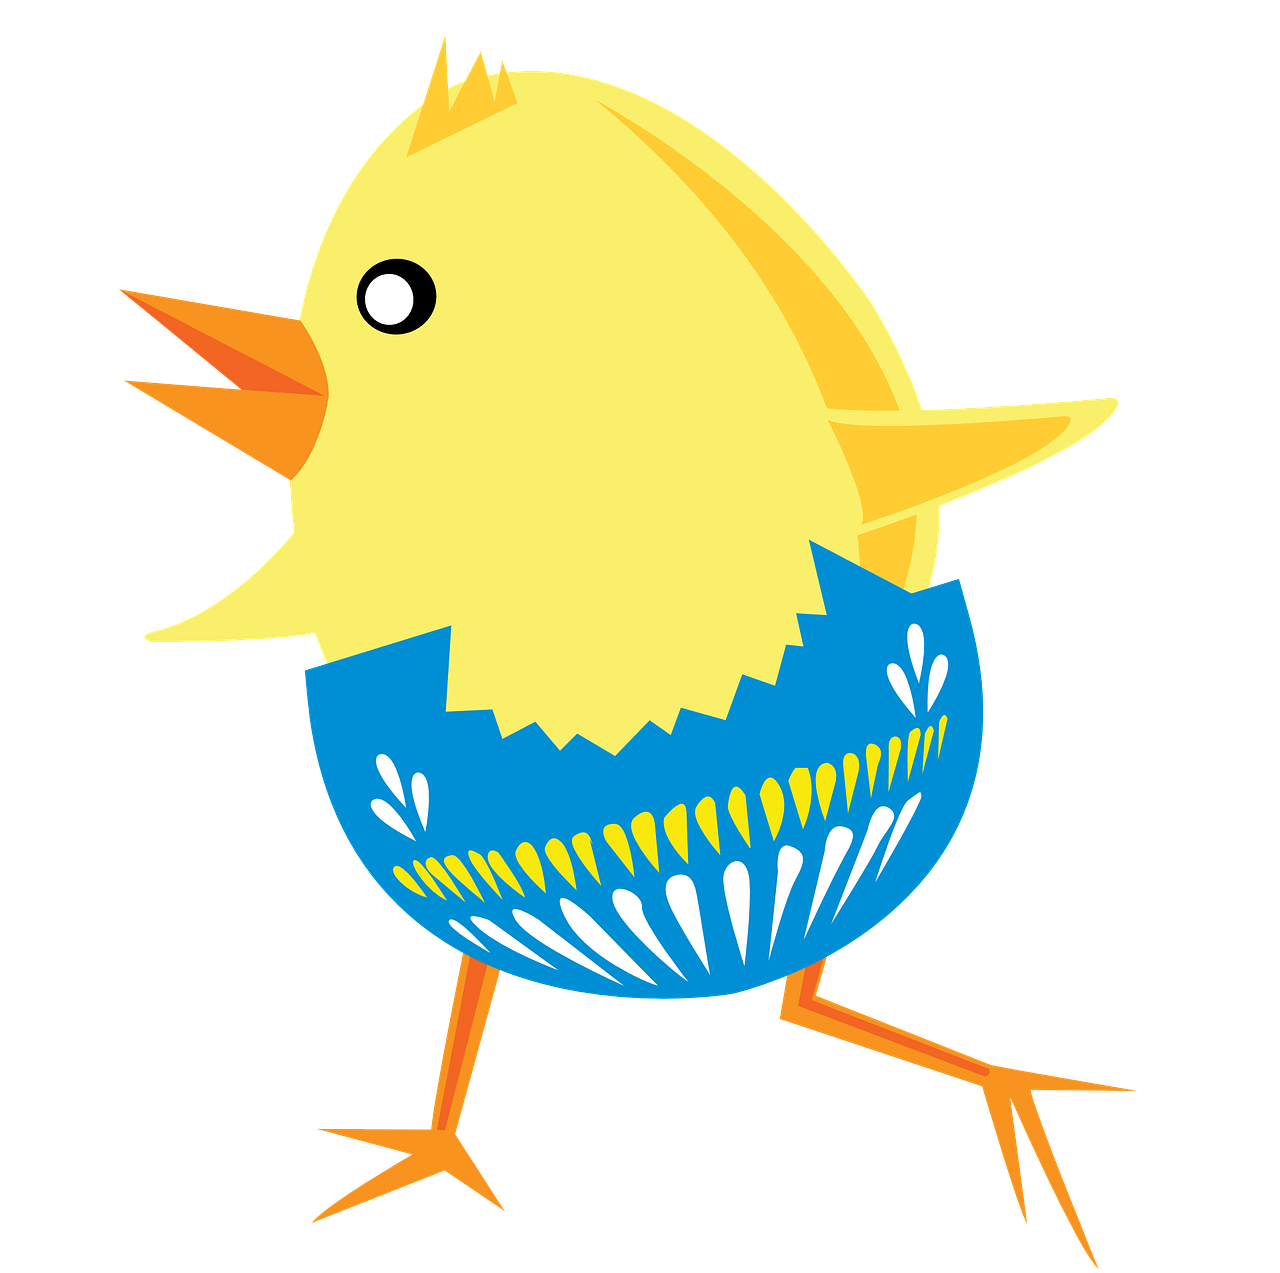 a yellow bird sitting on top of a blue egg, an illustration of, mingei, istockphoto, fancy clothing, with a black background, look like someone is dancing